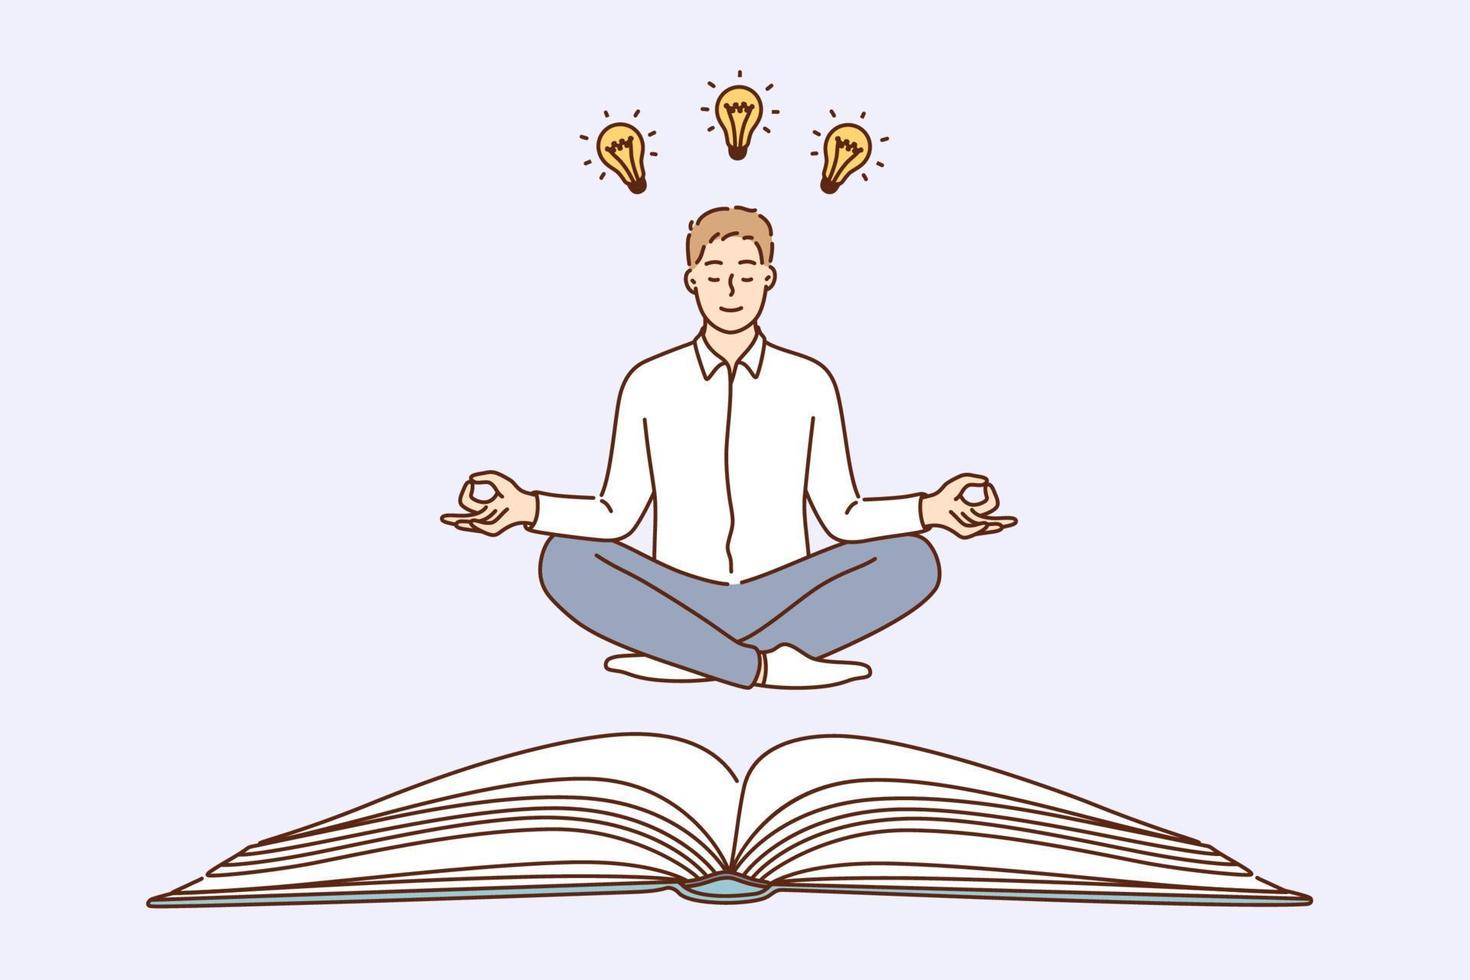 Having creative business idea concept. Young caucasian positive calm businessman cartoon character sitting on floor meditating with great ideas in head and light bulbs above vector illustration